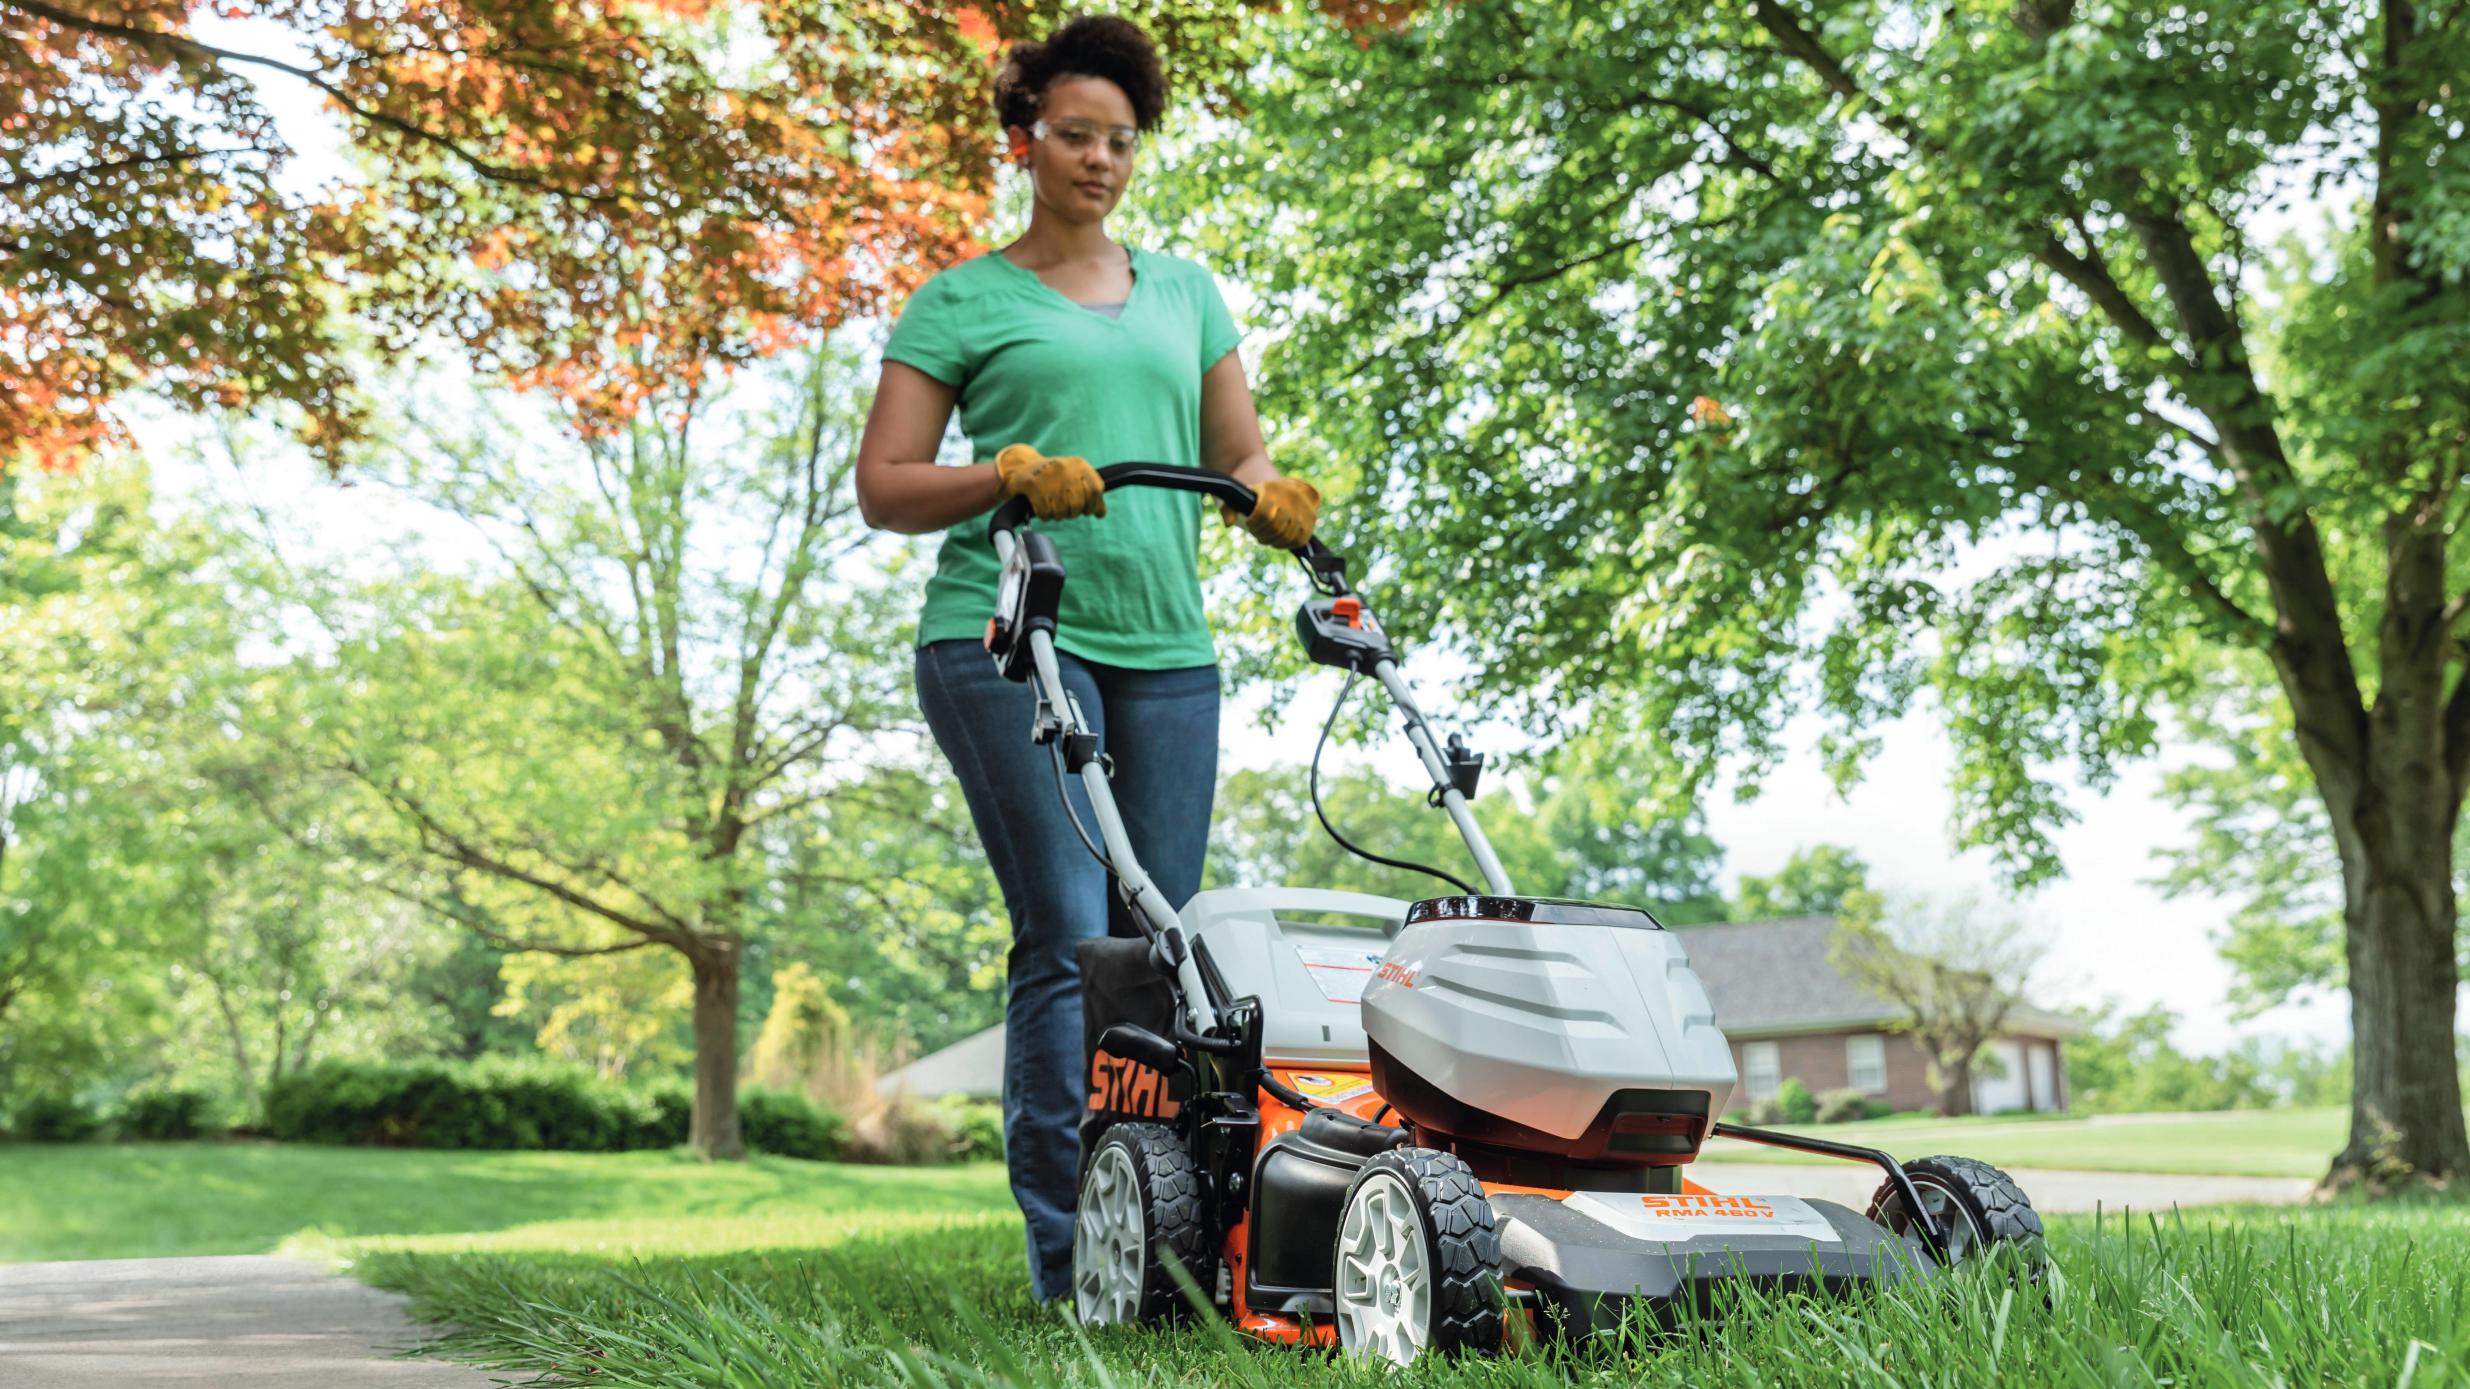 the best time to buy a lawn mower